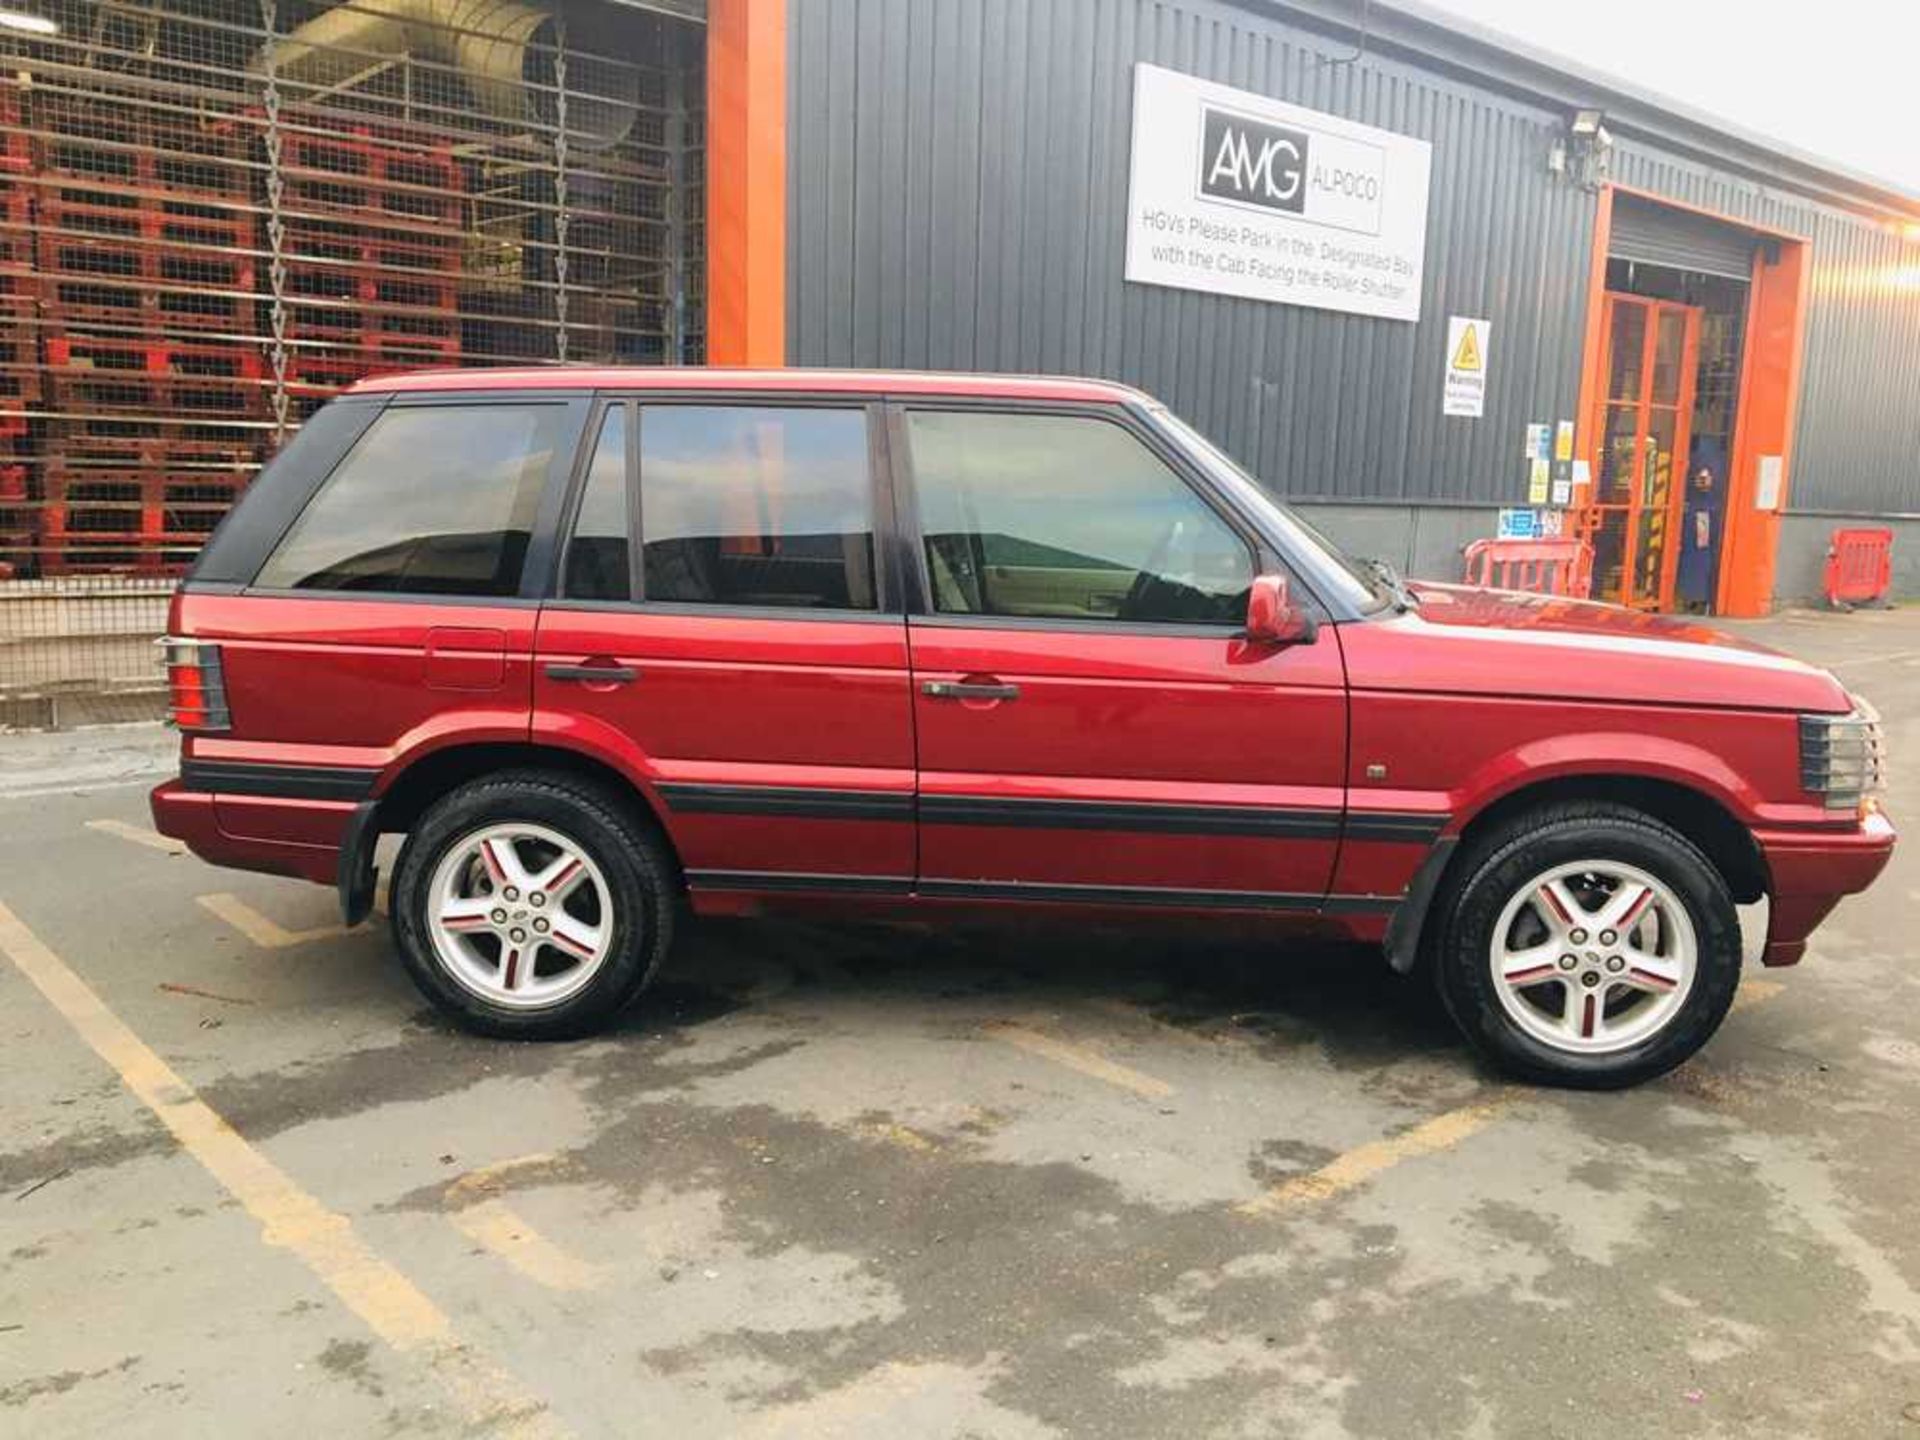 2001 Range Rover 2.5 TD Bordeaux One of just 200 UK-supplied limited edition 'Bordeaux' examples - Image 10 of 20